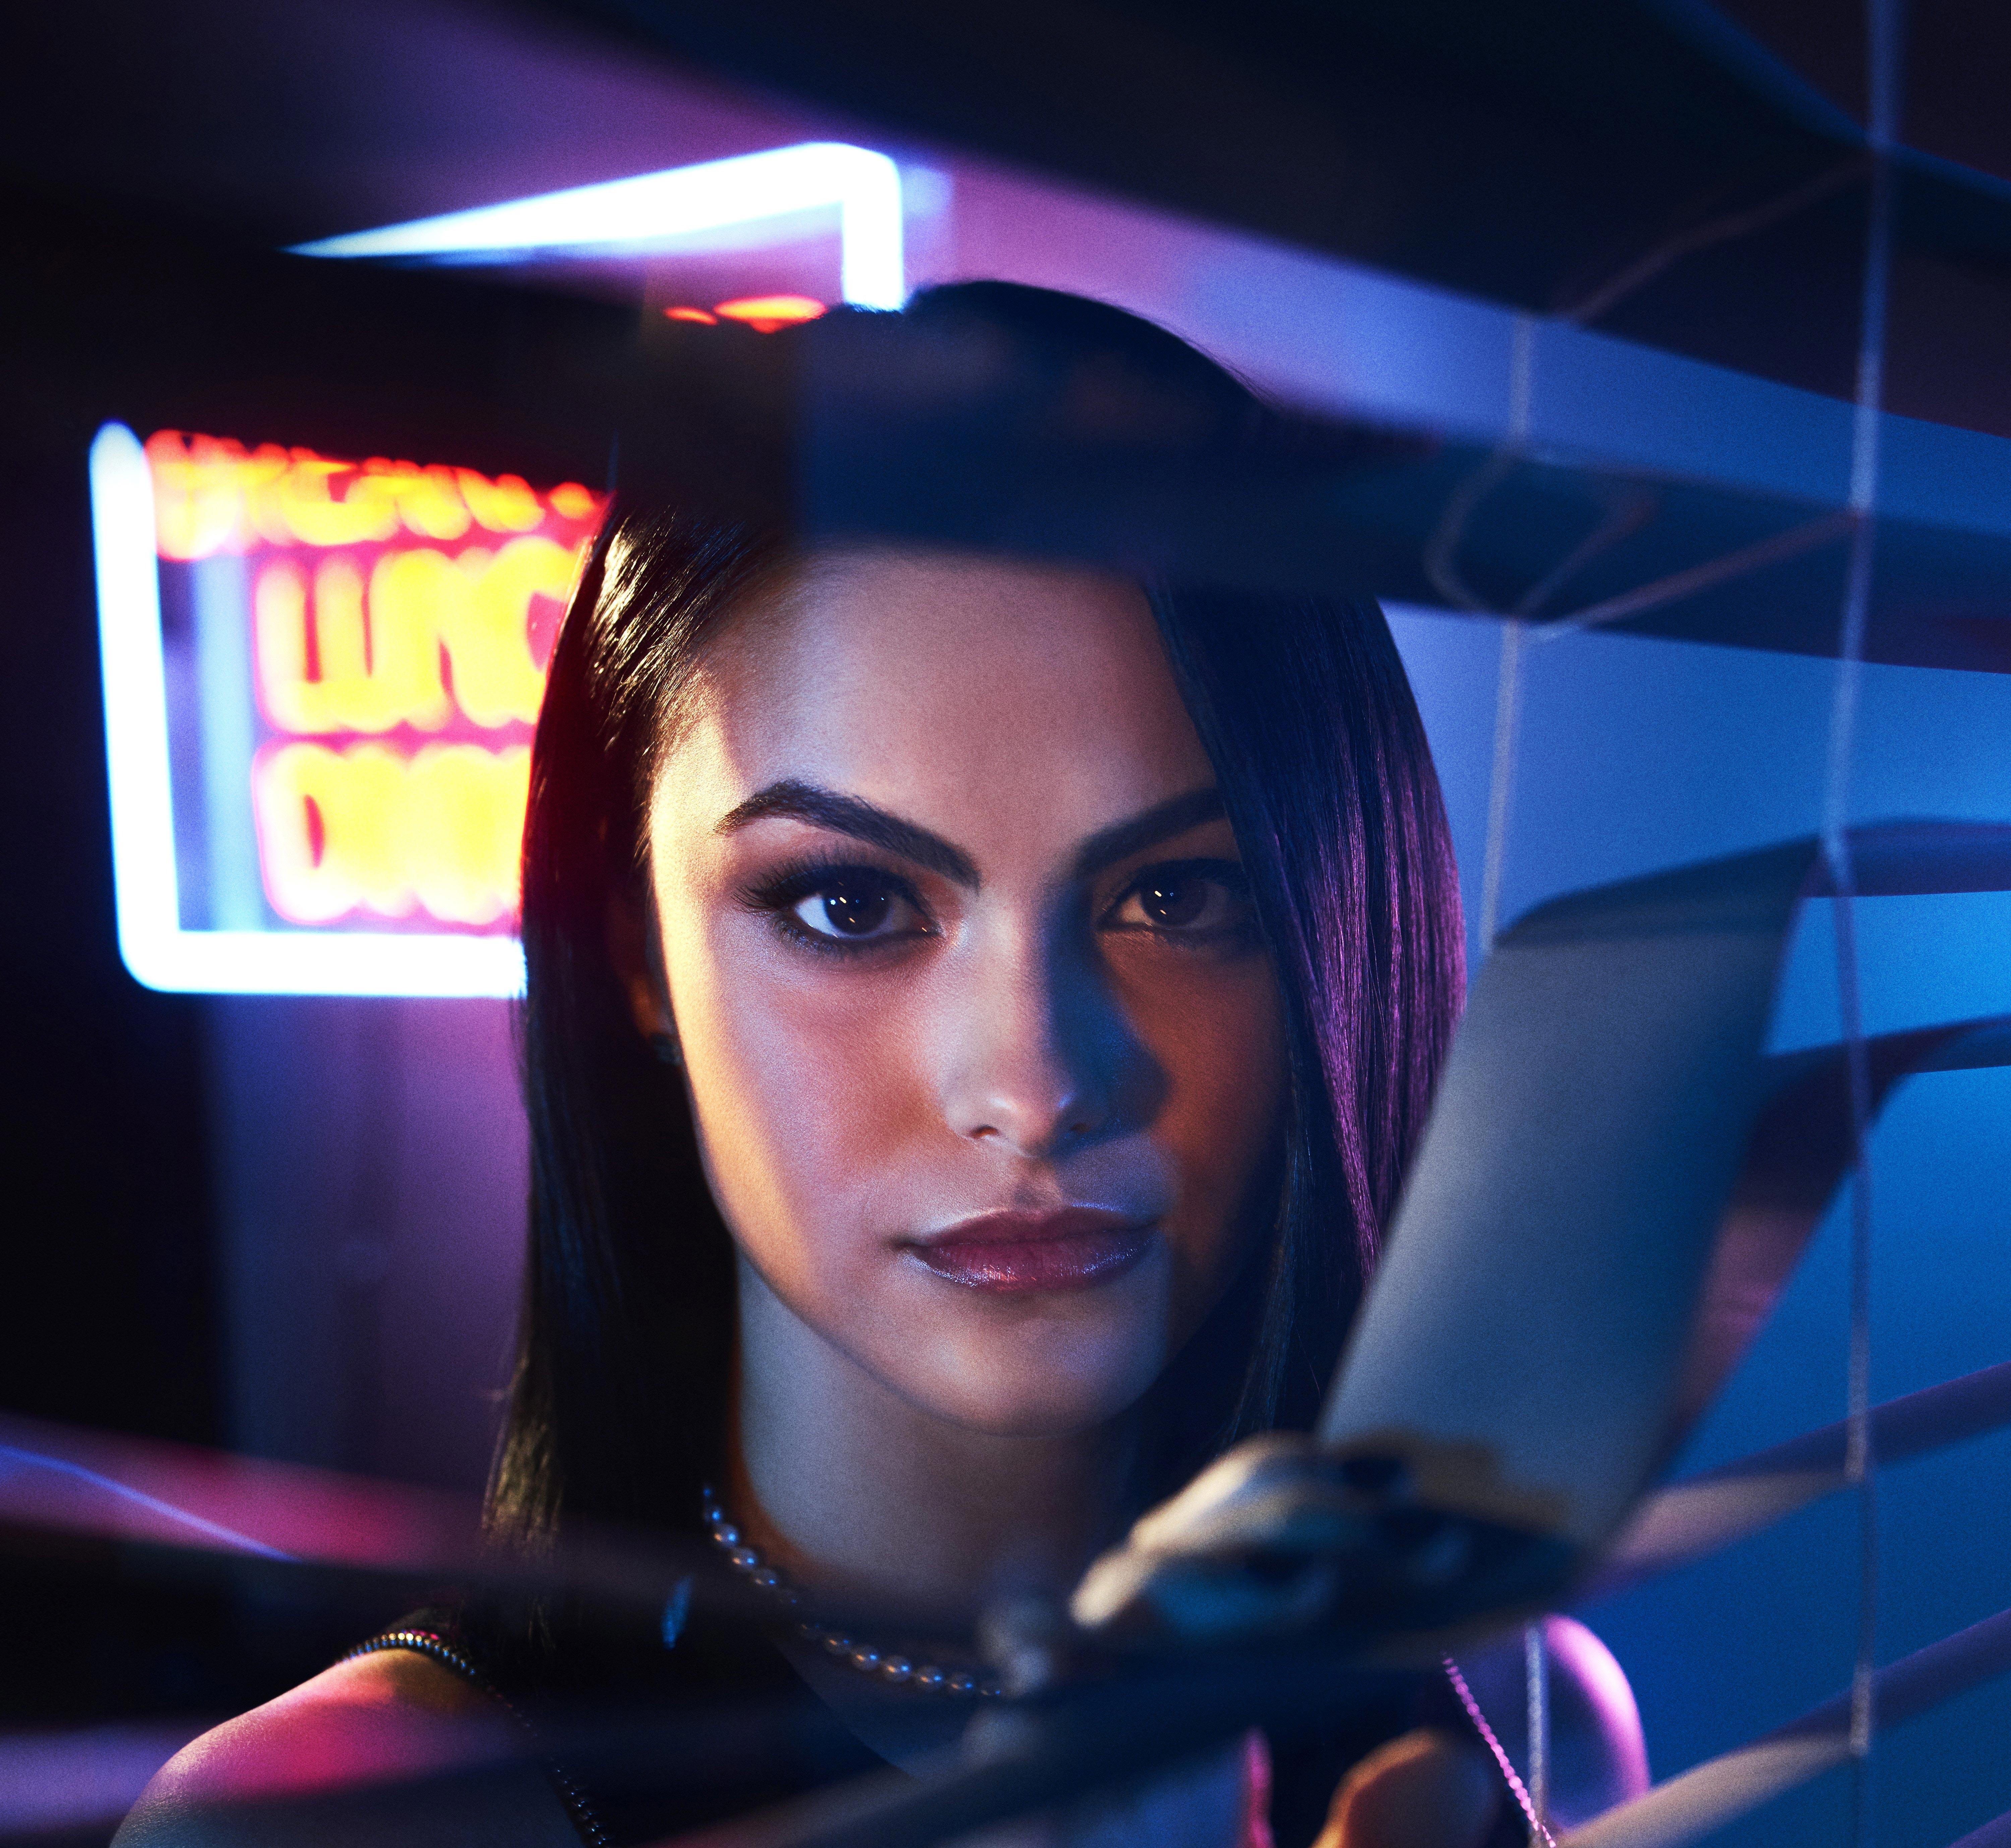 Camila Mendes As Veronica Lodge In Riverdale 5k, HD Tv Shows, 4k